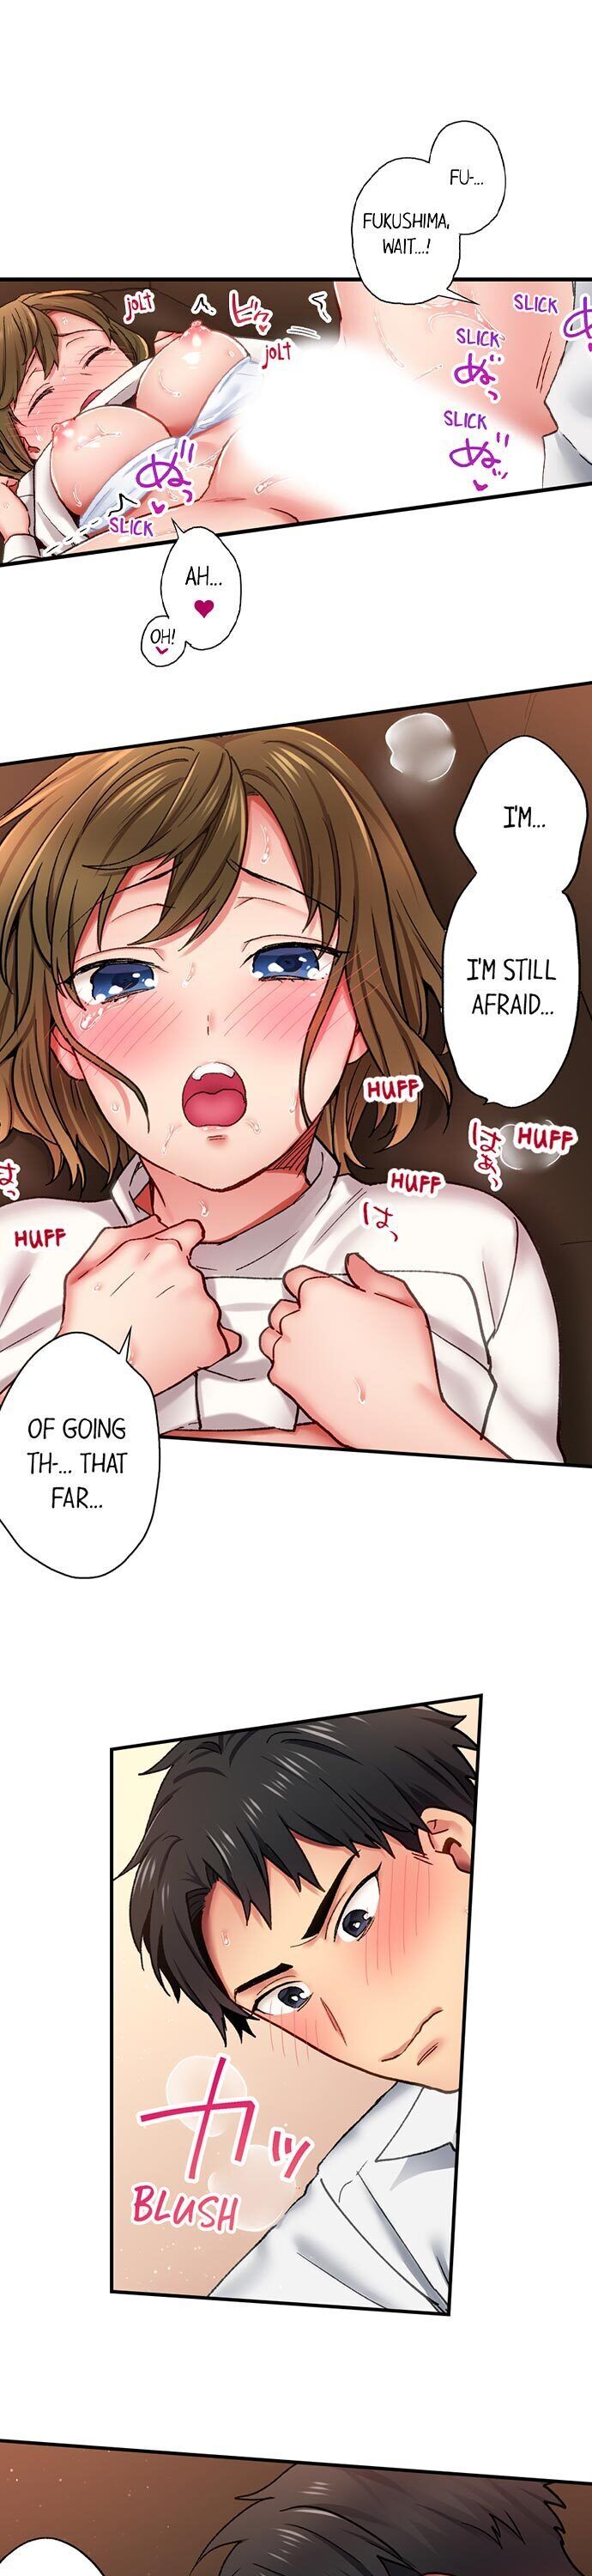 From Poker Face to Cumming Face in 90 Seconds - Chapter 6 Page 6